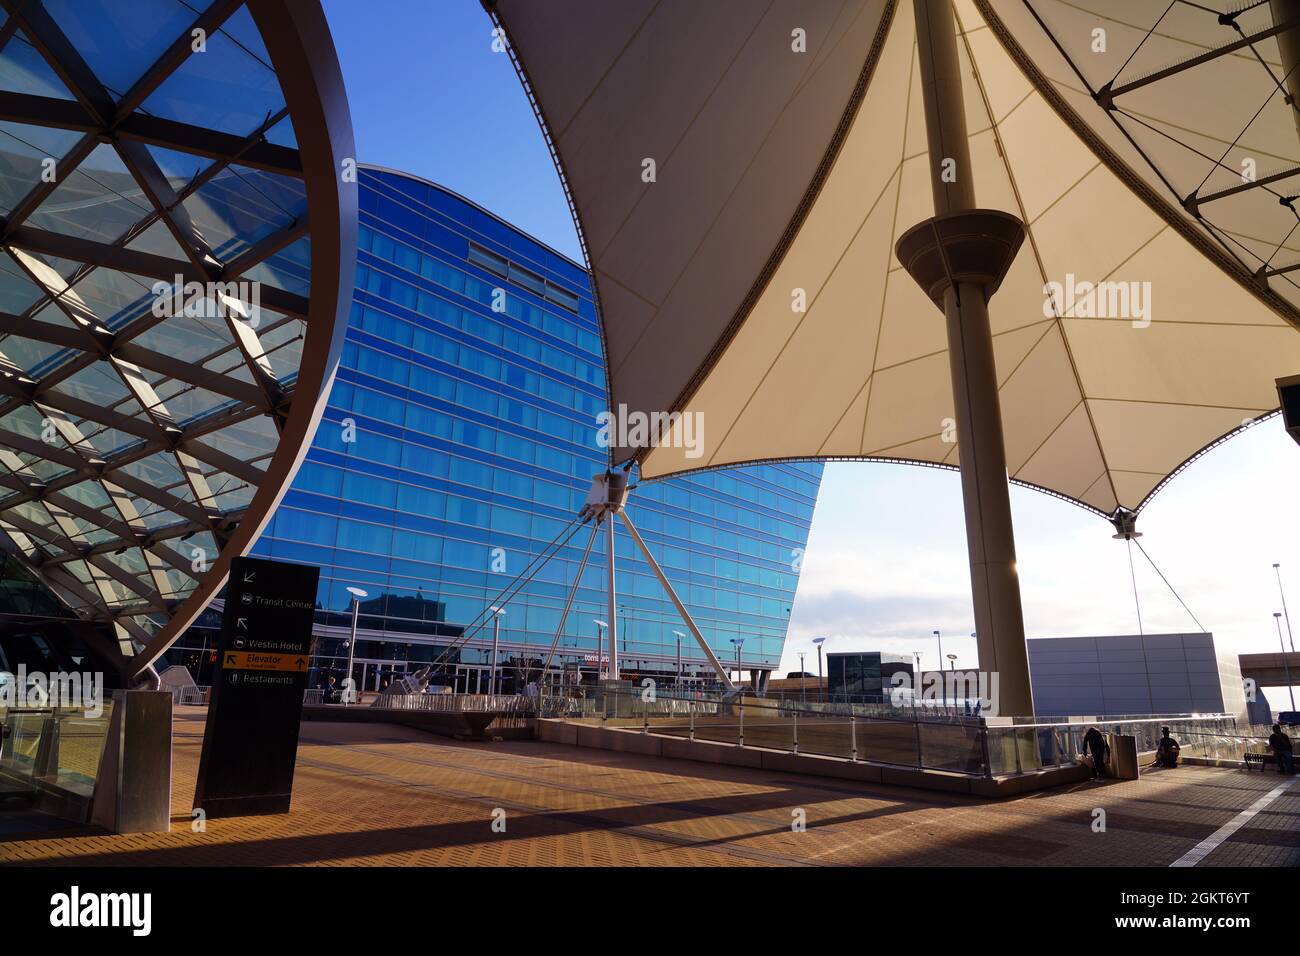 DENVER, CO -10 APR 2021- Interior view of the Jeppesen Terminal with white tent roof at Denver International Airport, or DIA (DEN). Stock Photo